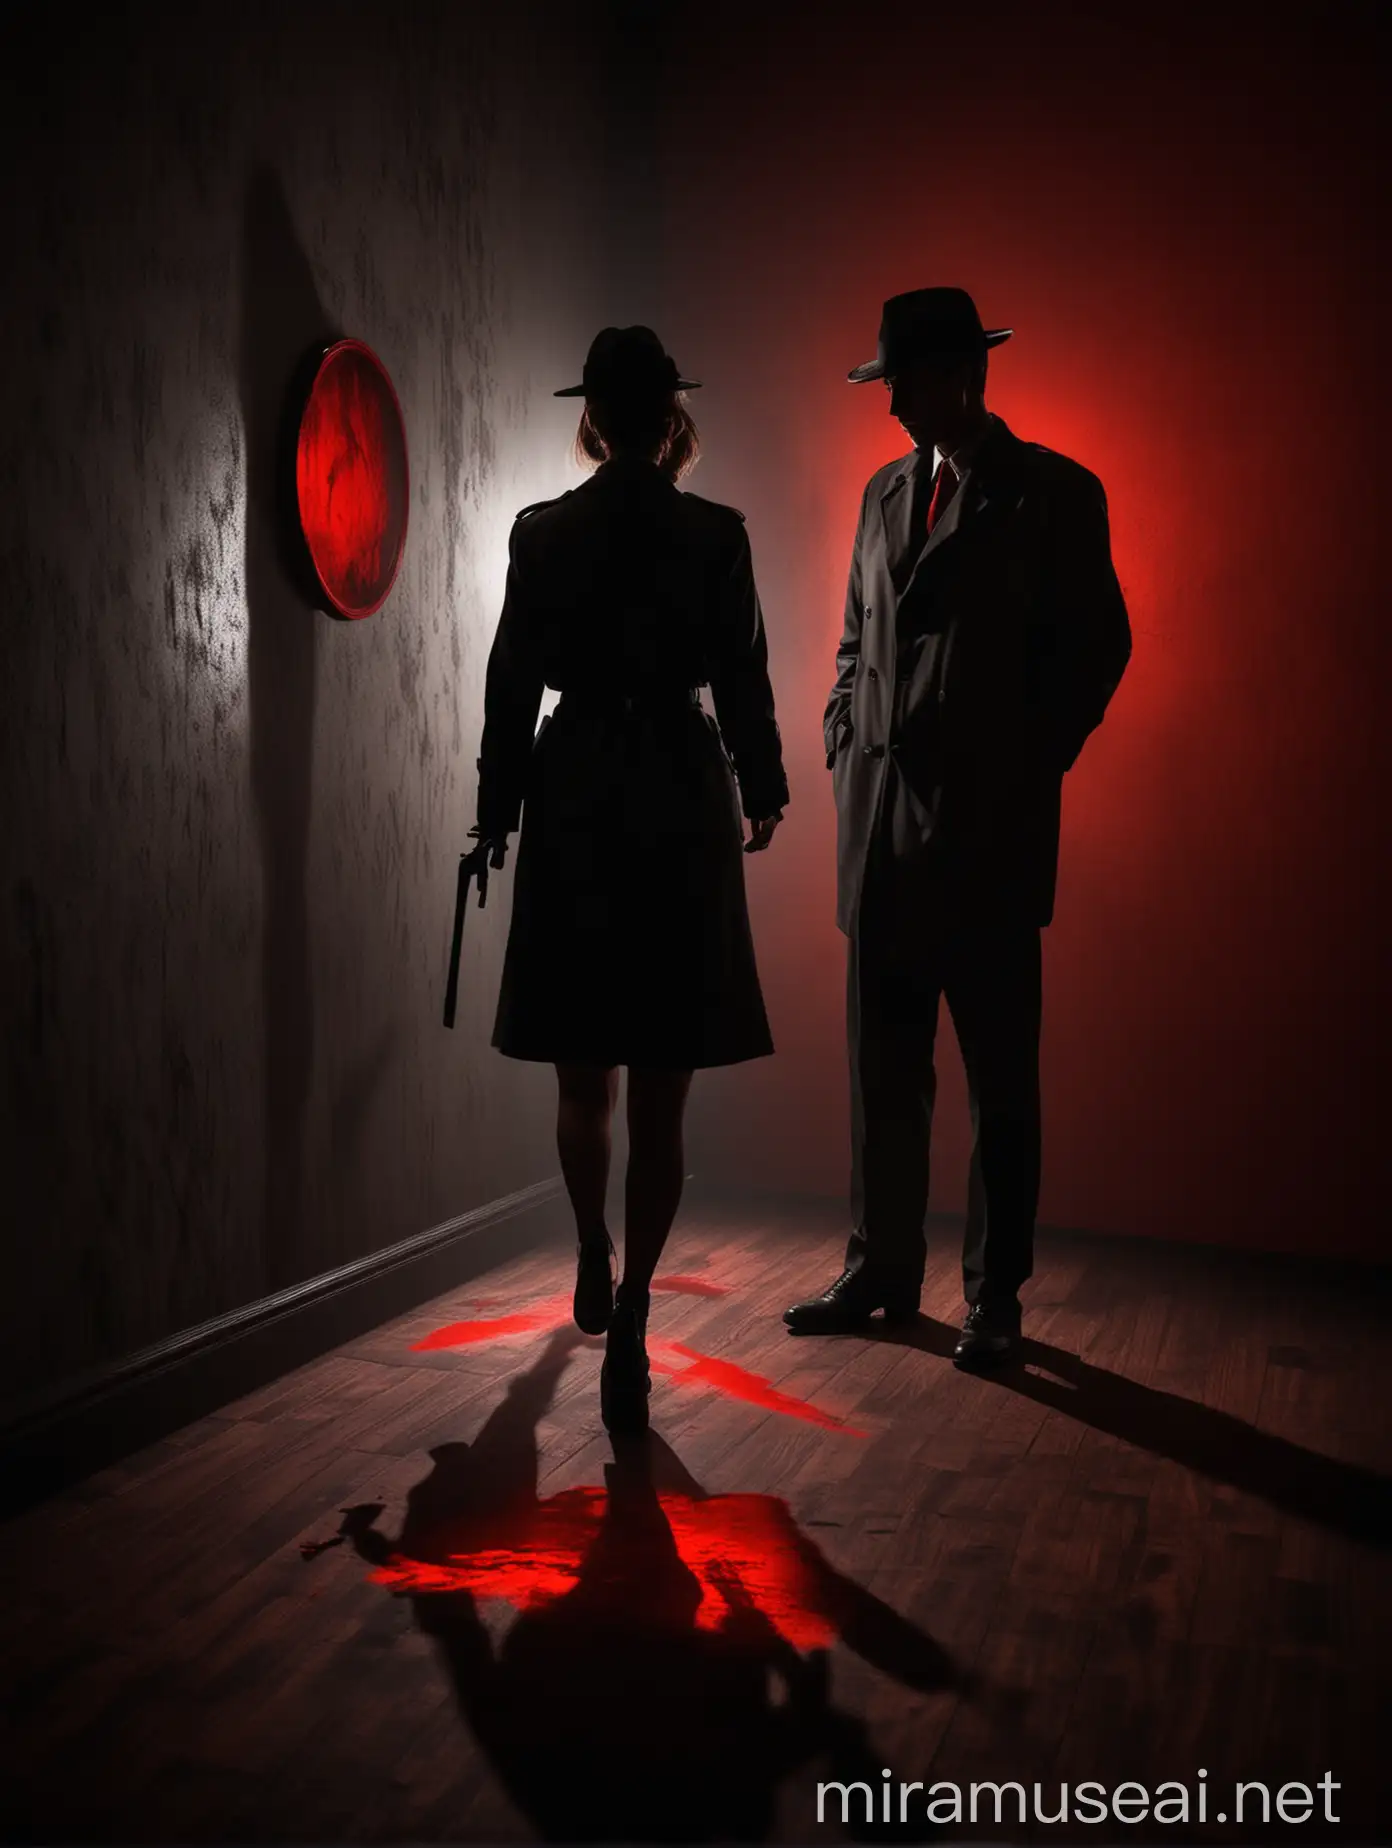 A beautiful detective lady searching a crime scene, with a mysterious shadow of a man watching her from the red black glowing dark